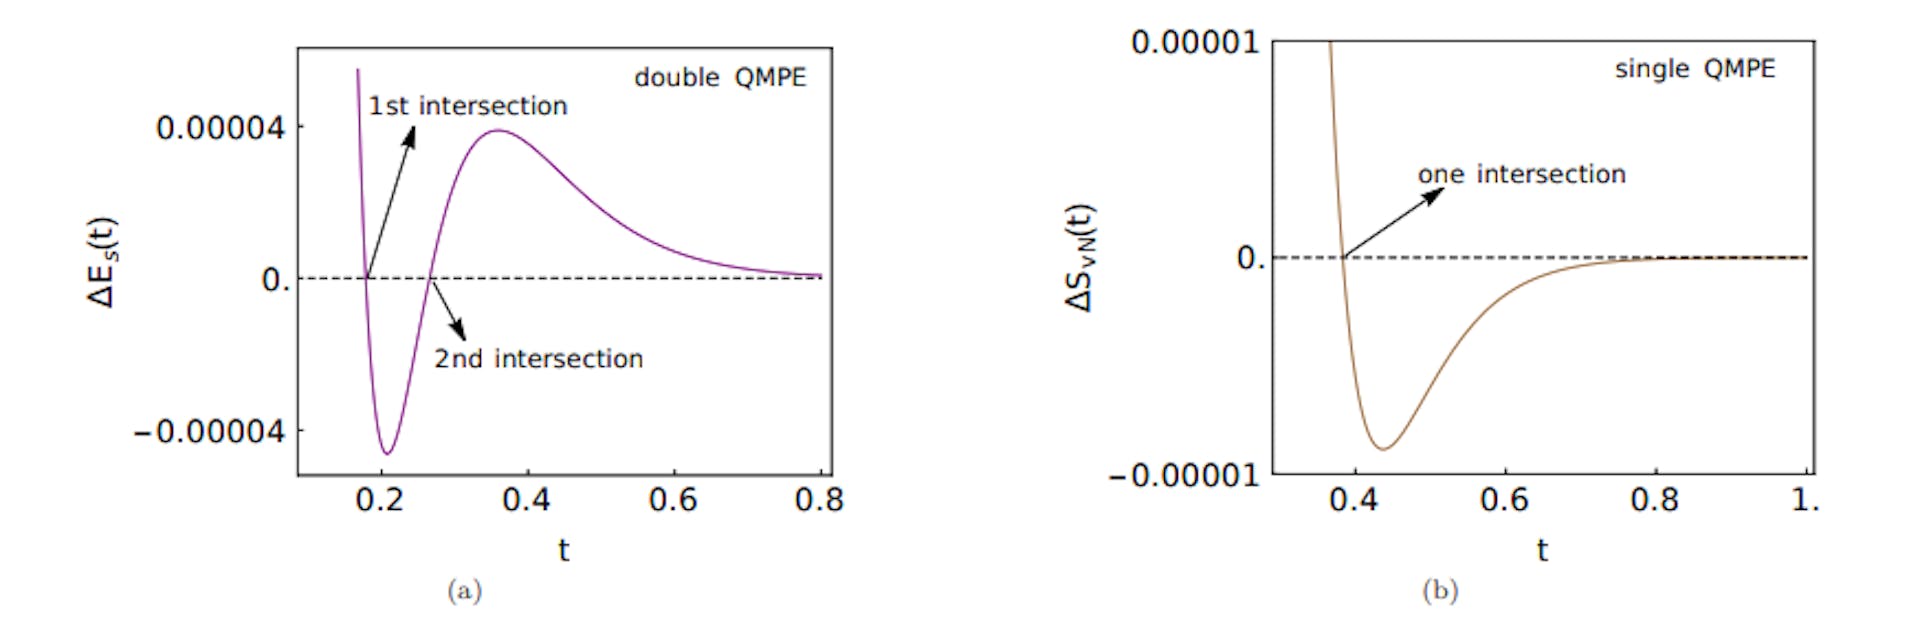 FIG. 13. The figures (a) and (b) show nature of QMPE in energy and von Neumann entropy in region (b), respectively, for the same parameters exhibiting double QMPE in ρgg(t) in Fig. 12(b). We observe that although energy shows double QMPE (figure (a)), the von Neumann entropy exhibits single QMPE only (figure (b)).